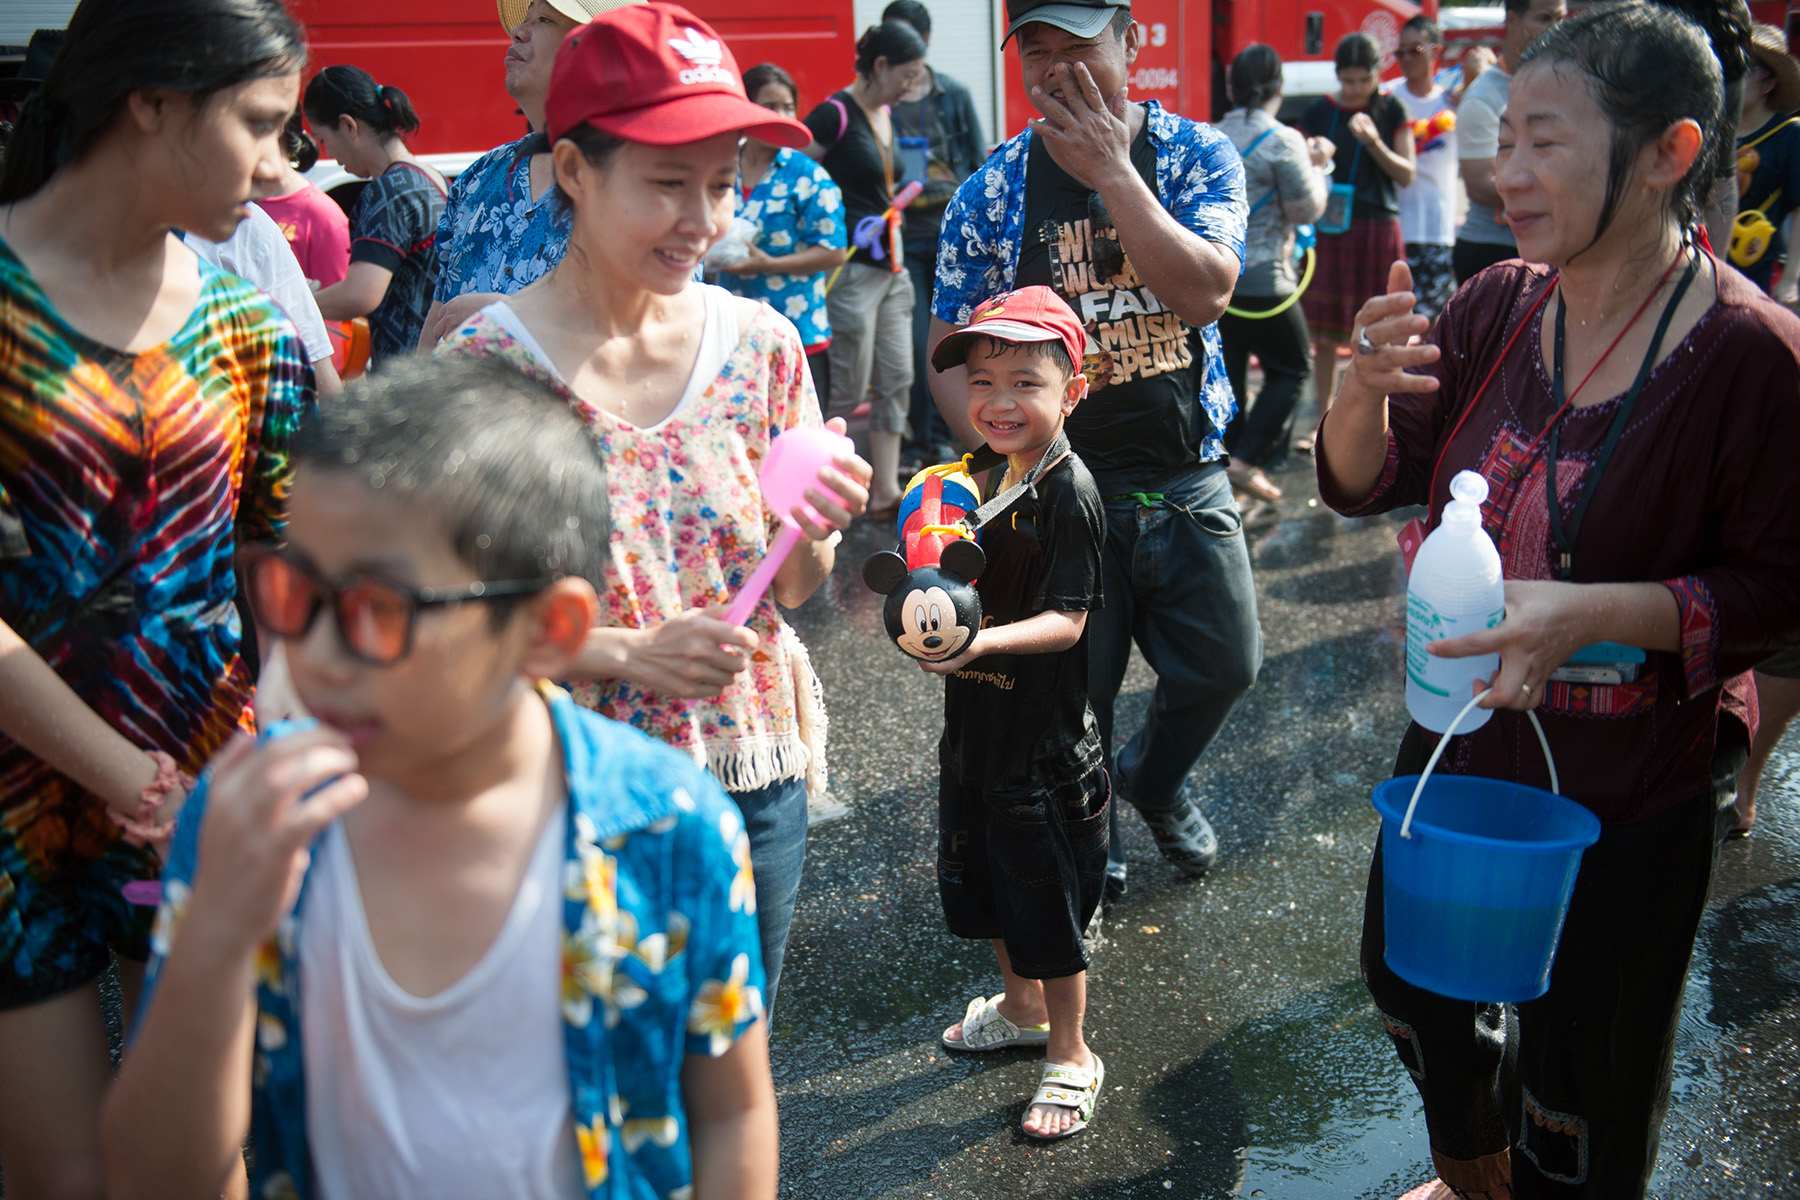 People are getting soaked during the Songkran festival.